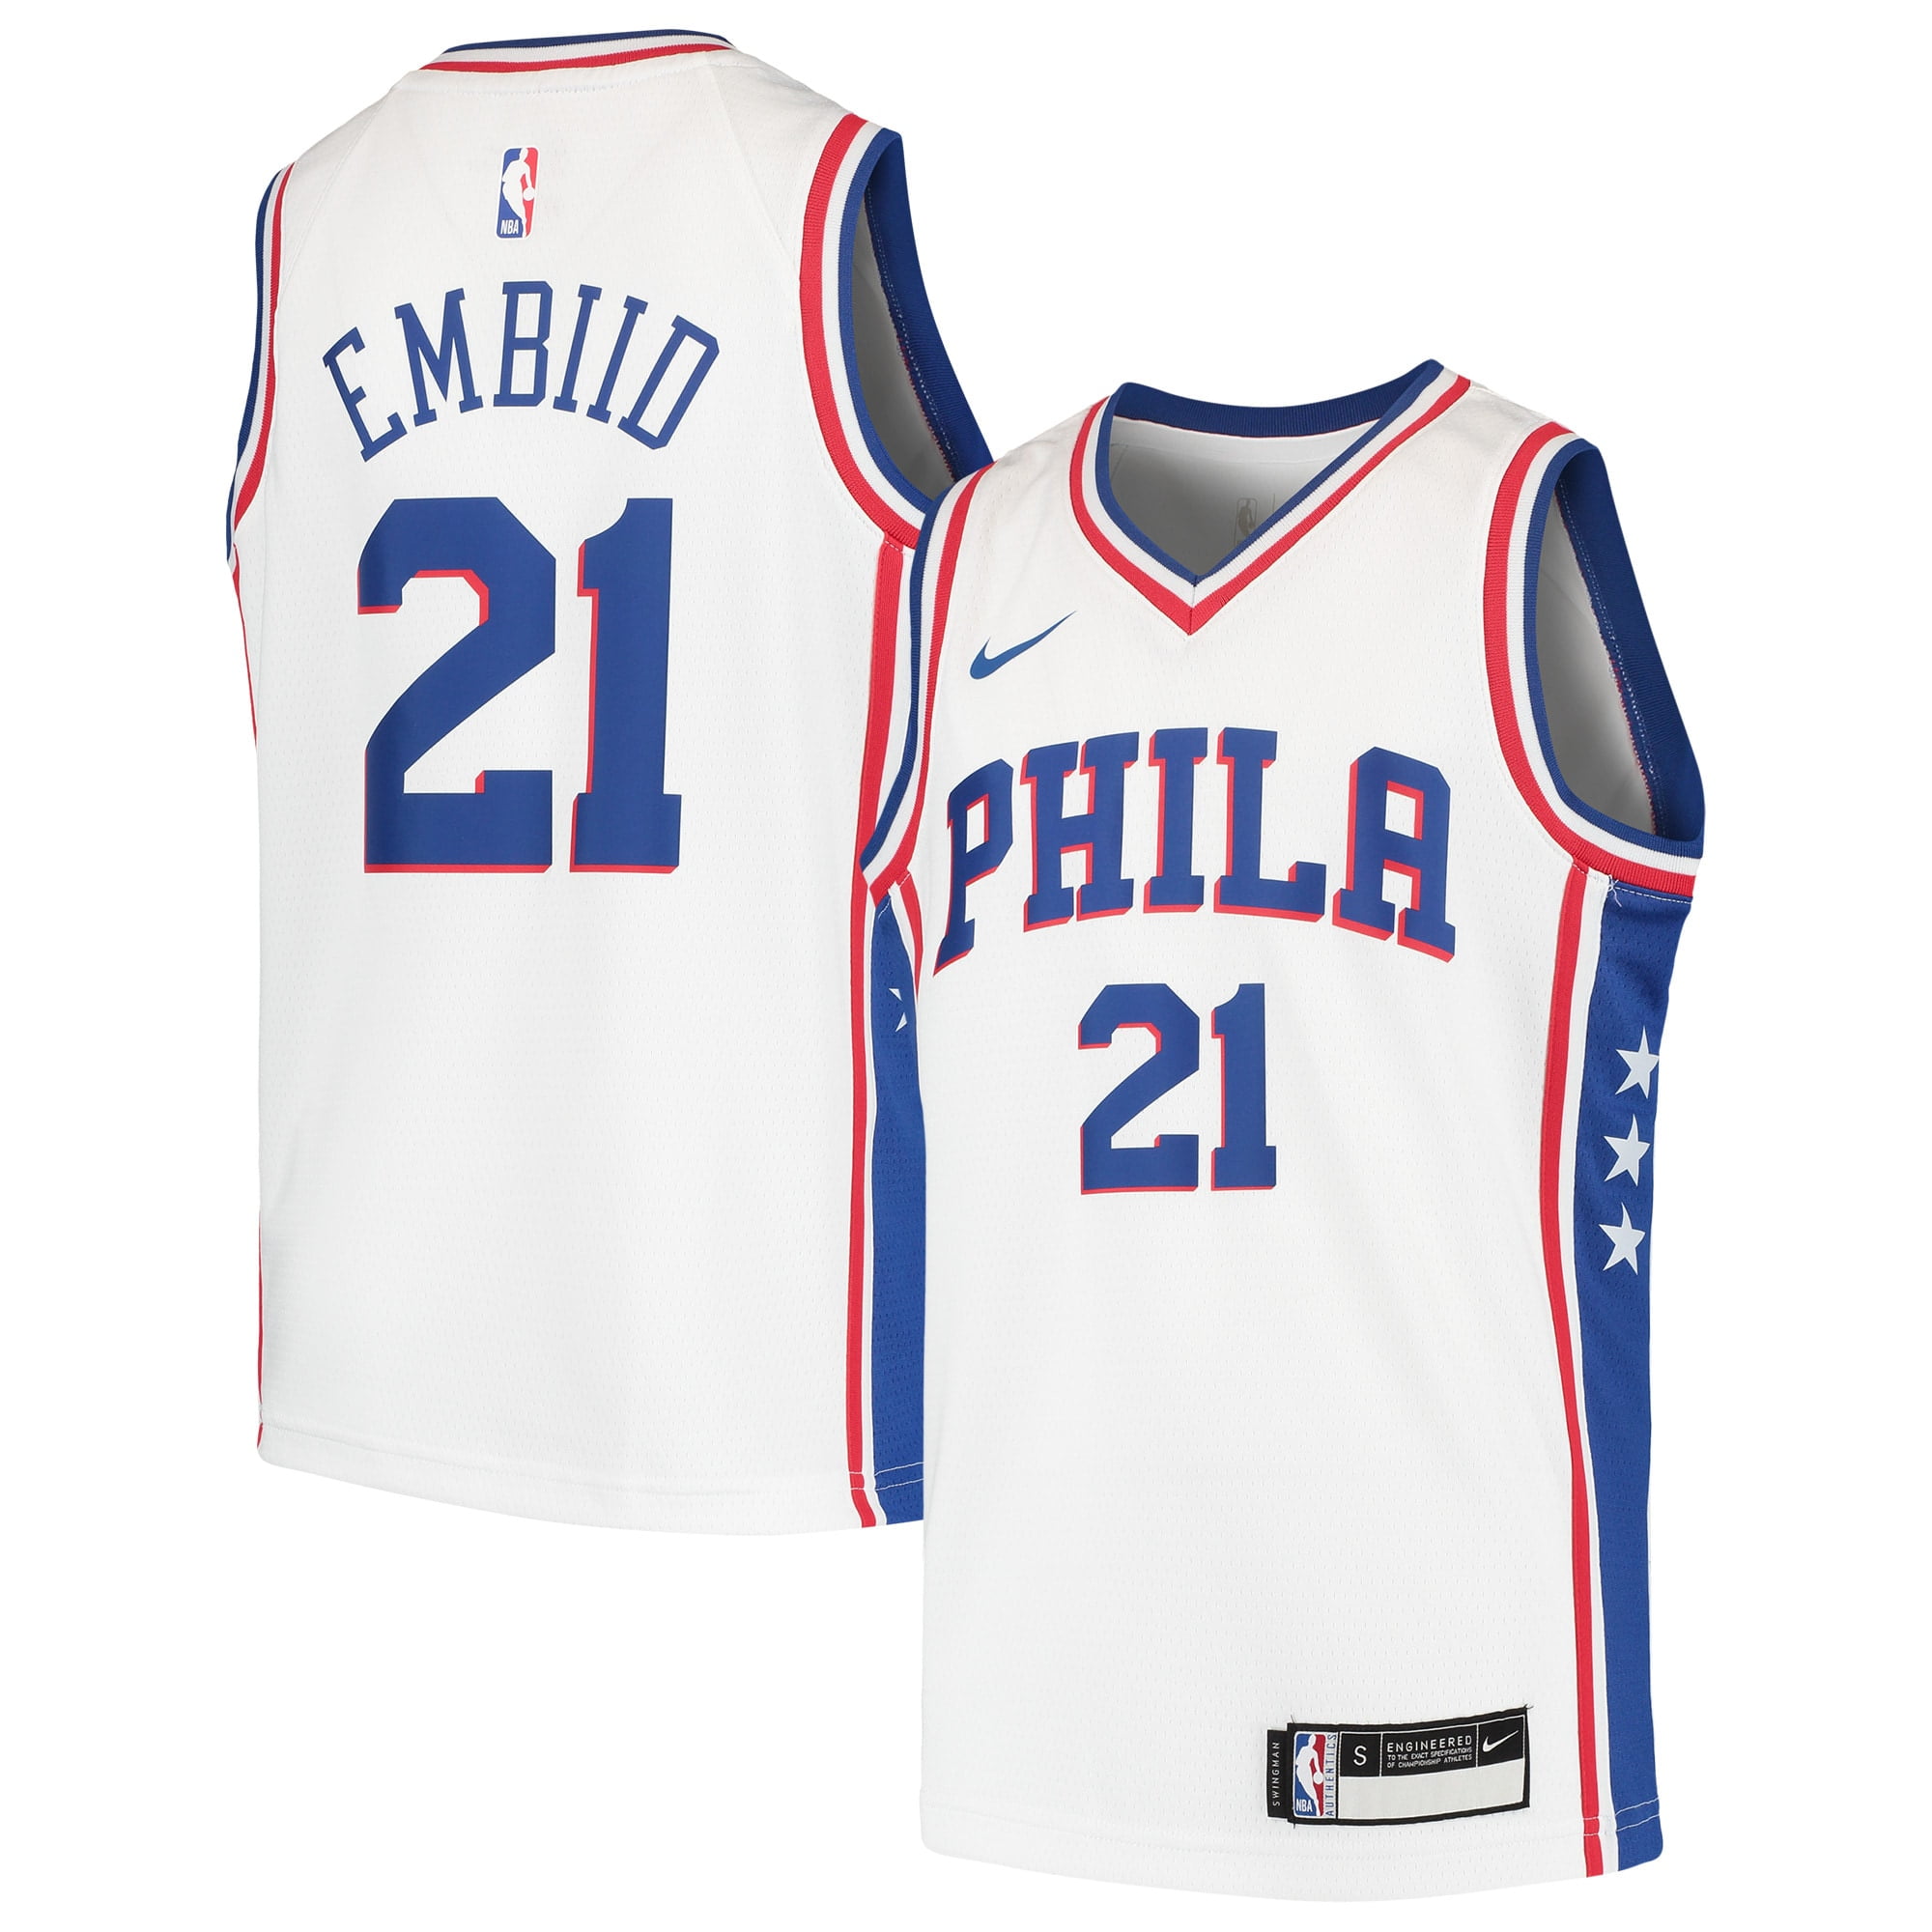 embiid jersey youth